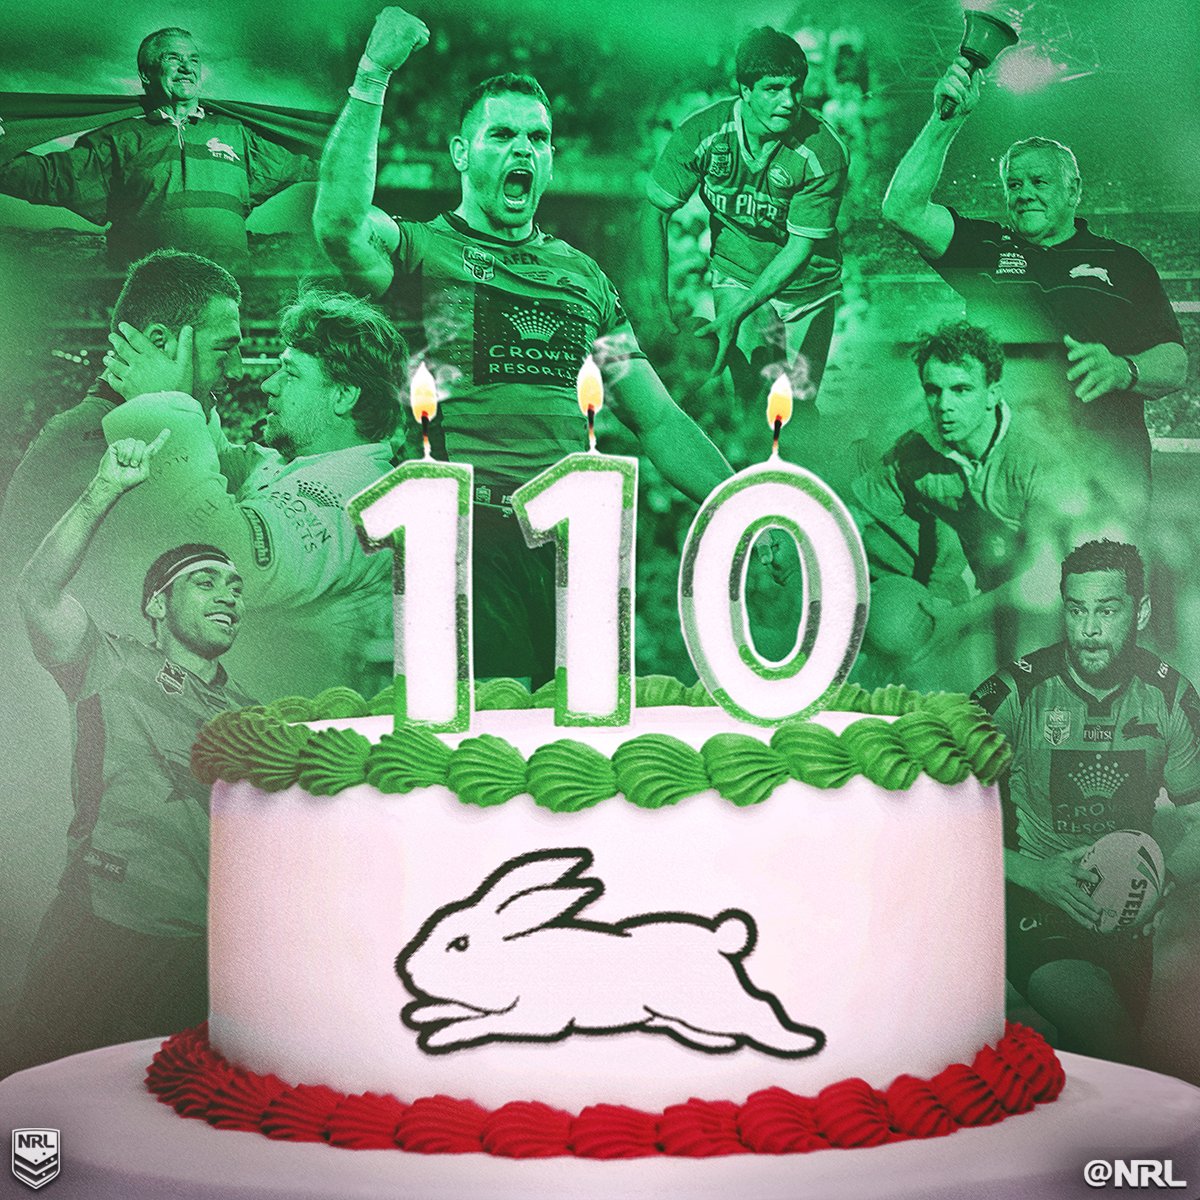 RT @NRL: Happy Birthday to the oldest team in the #NRL!

???? @SSFCRABBITOHS - 110 years old today ???? https://t.co/HiHmepszMb